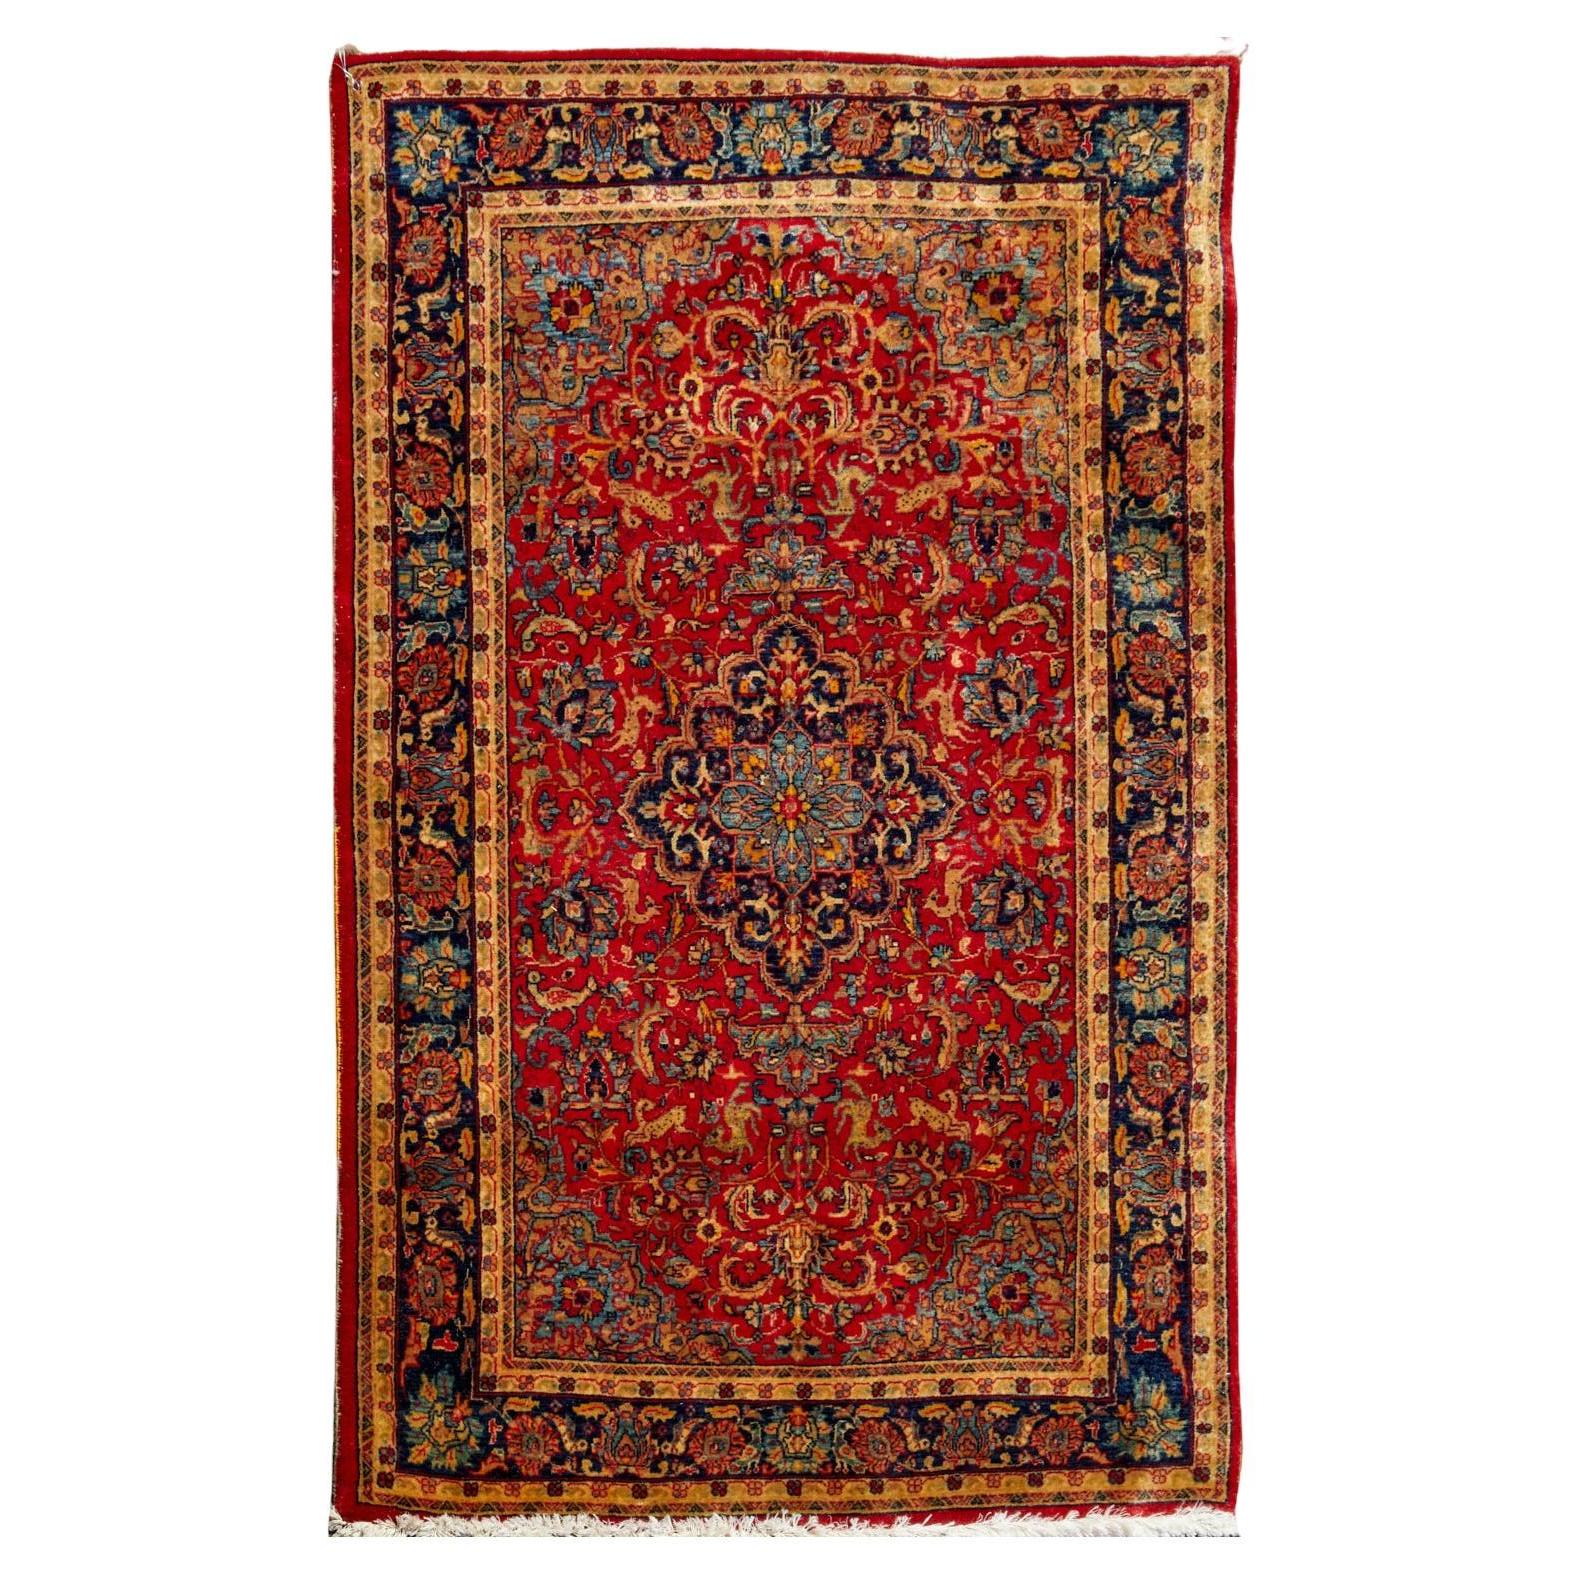 Early 20th C. Sarouk Rug with Tight Weave and Rich Jewel Tones For Sale